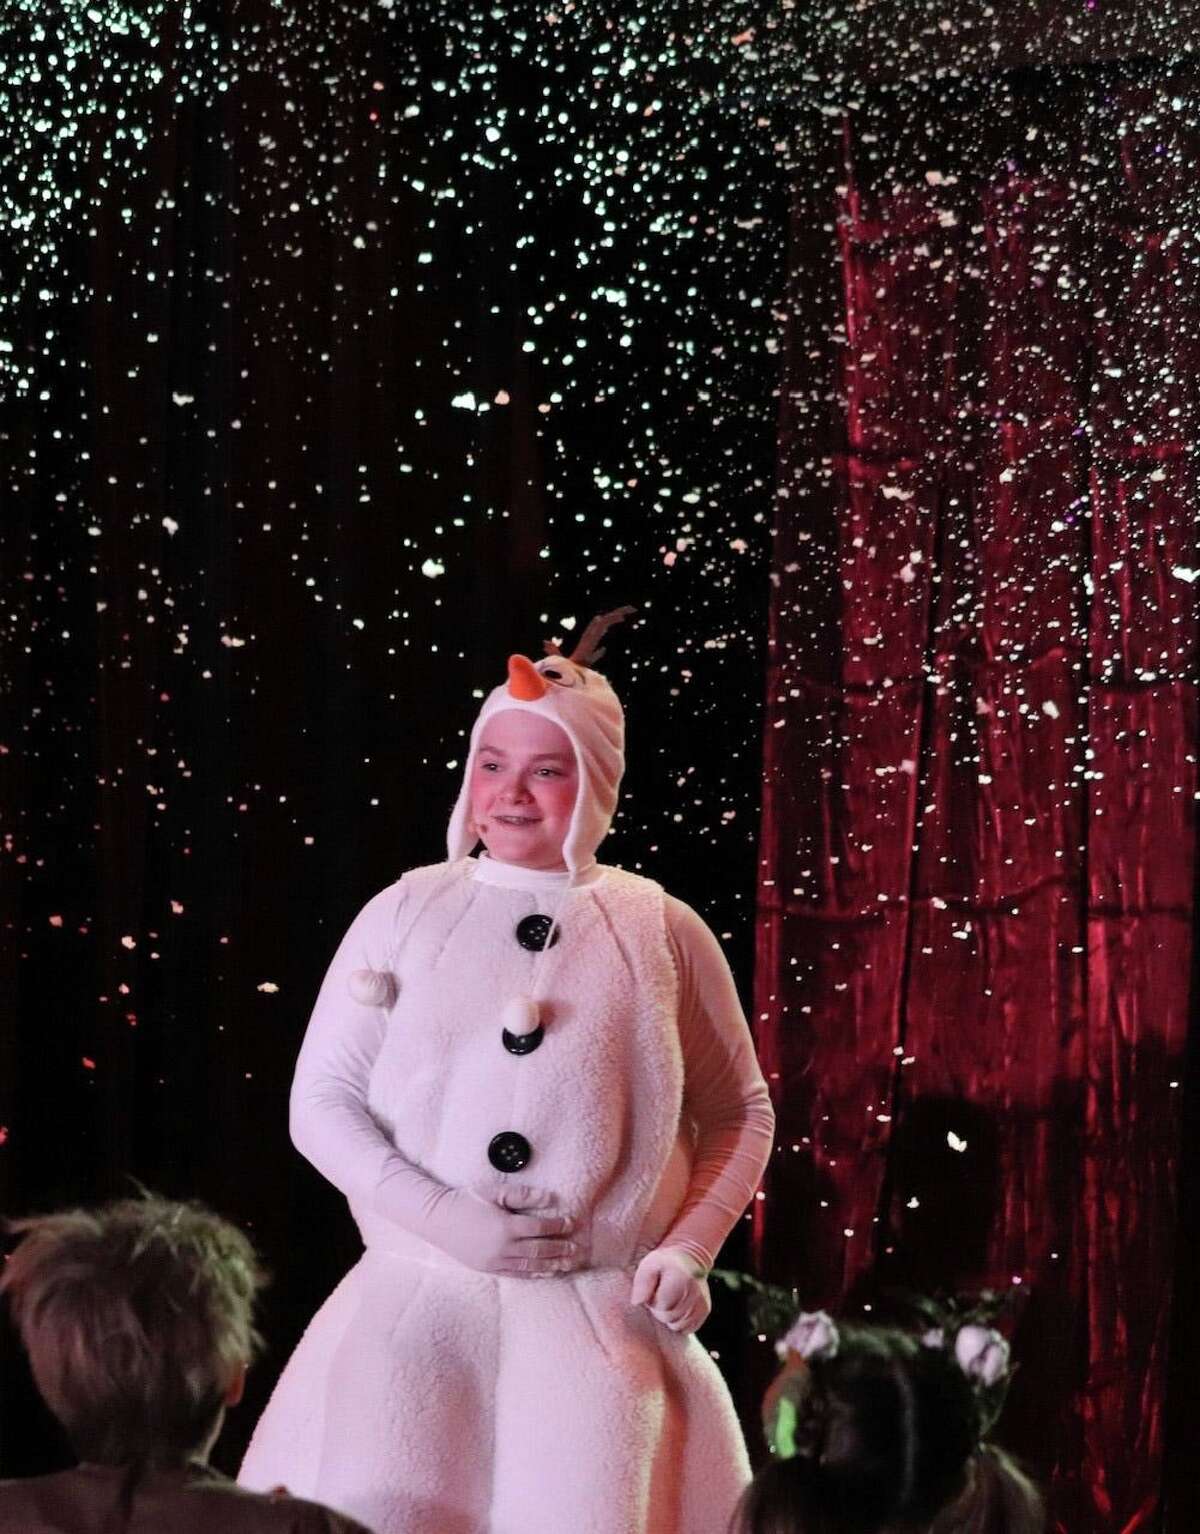 Riverside School student Justin Carroll plays Olaf during the school's production of "Frozen" the musical.